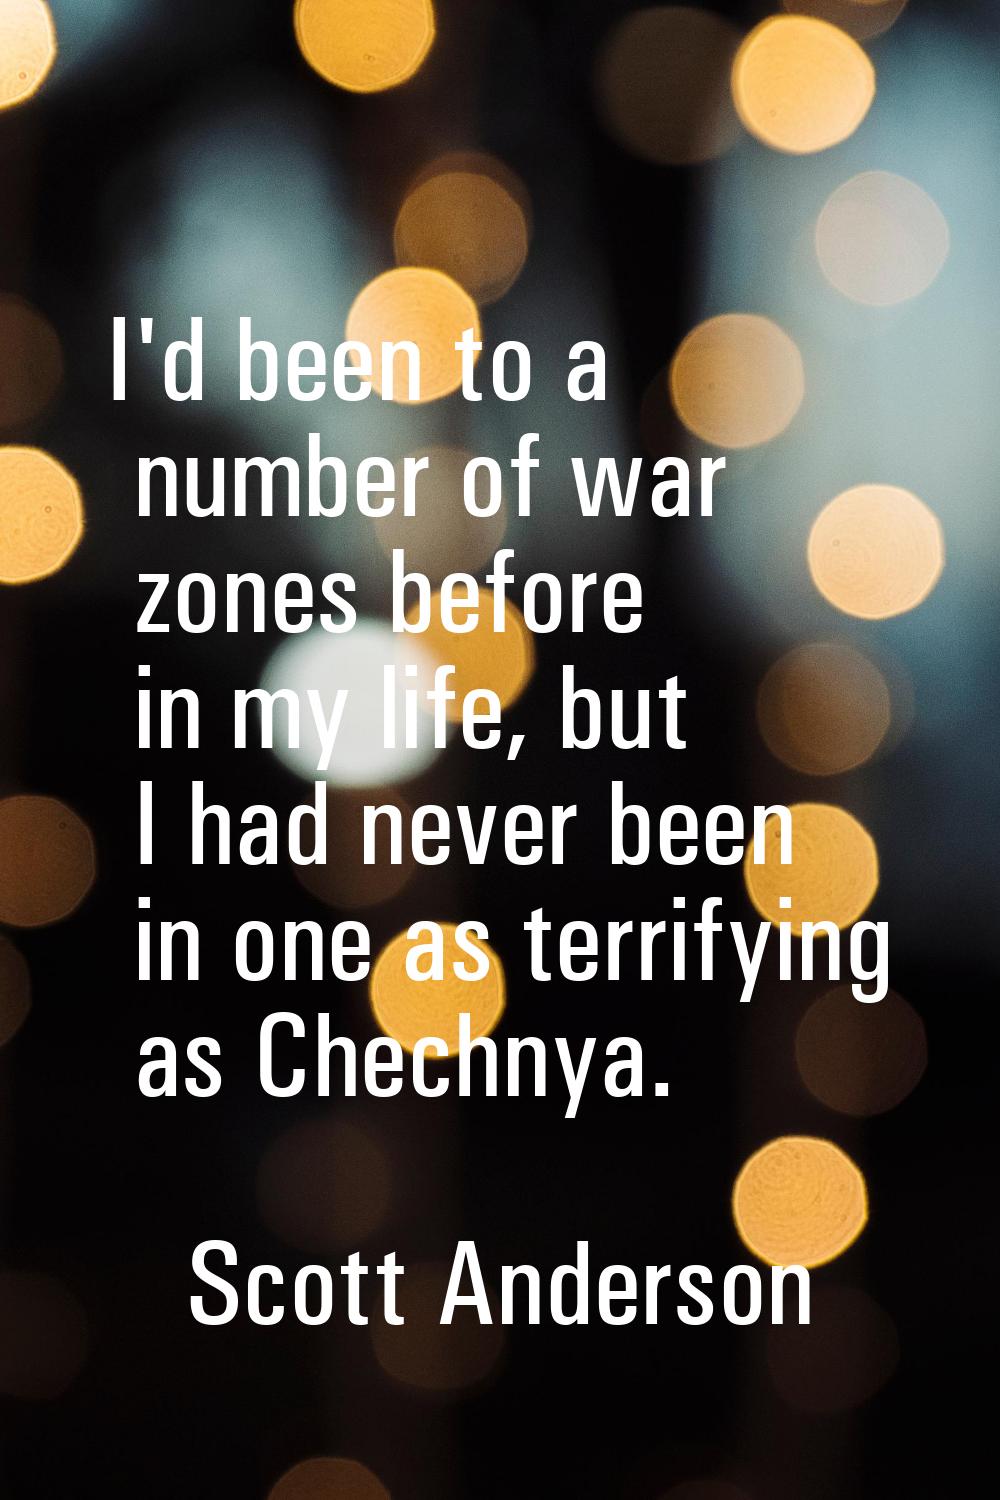 I'd been to a number of war zones before in my life, but I had never been in one as terrifying as C